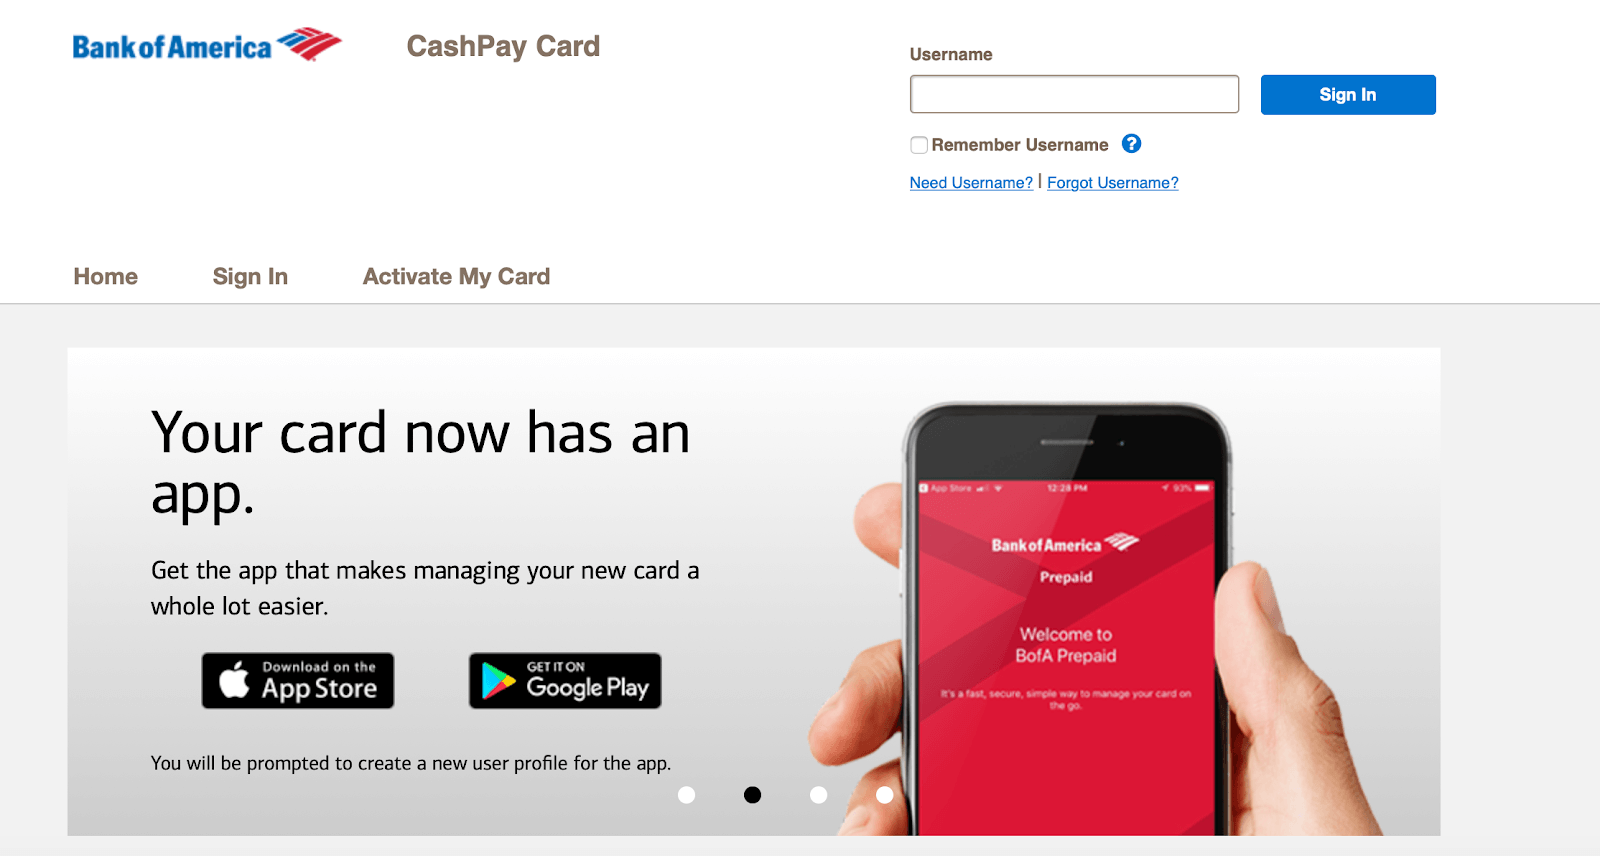 cashpay card sign in